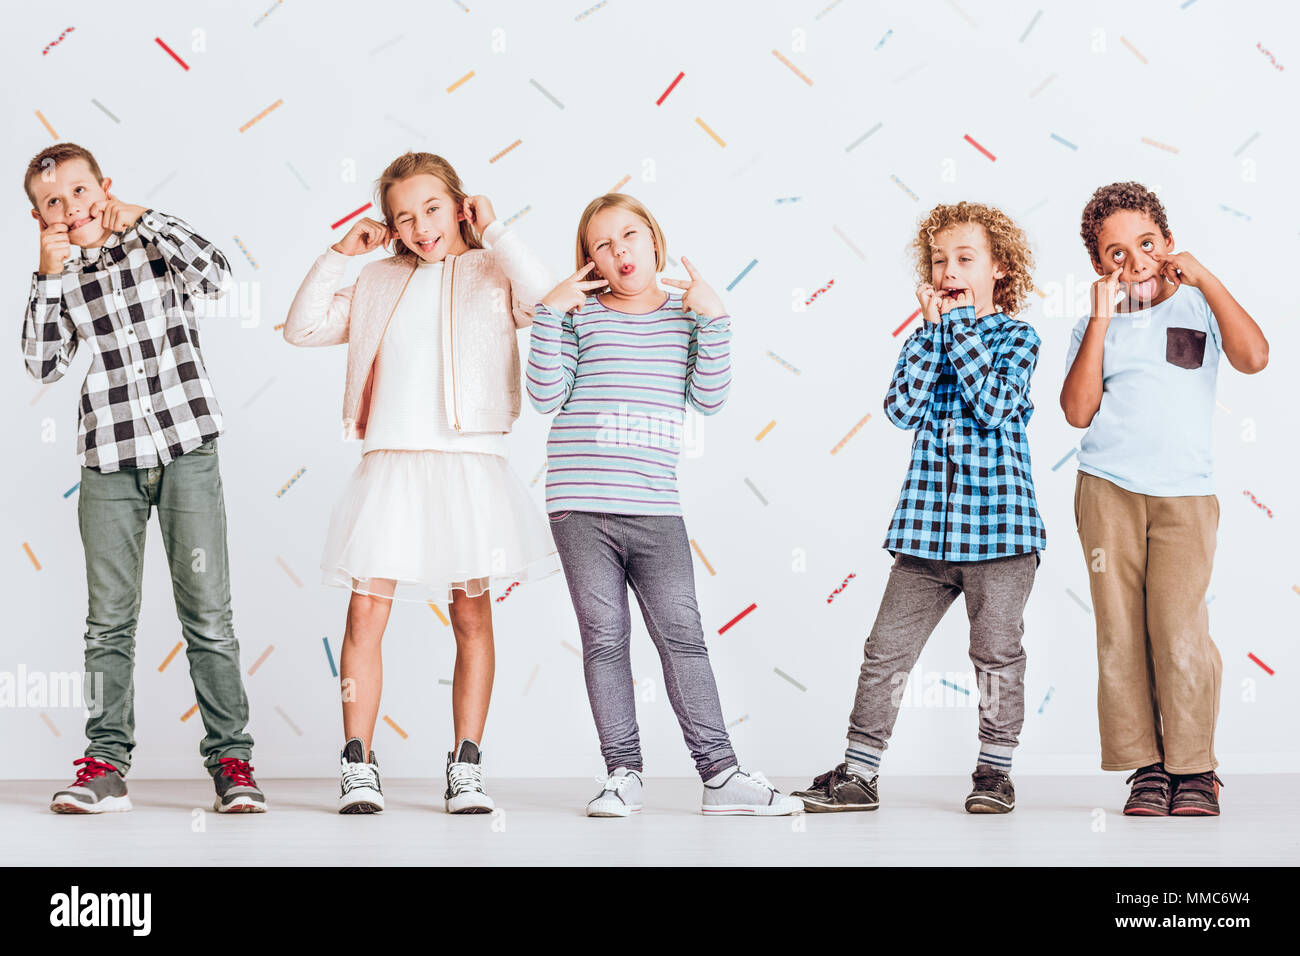 Group of kids standing next to each other and pulling faces Stock Photo